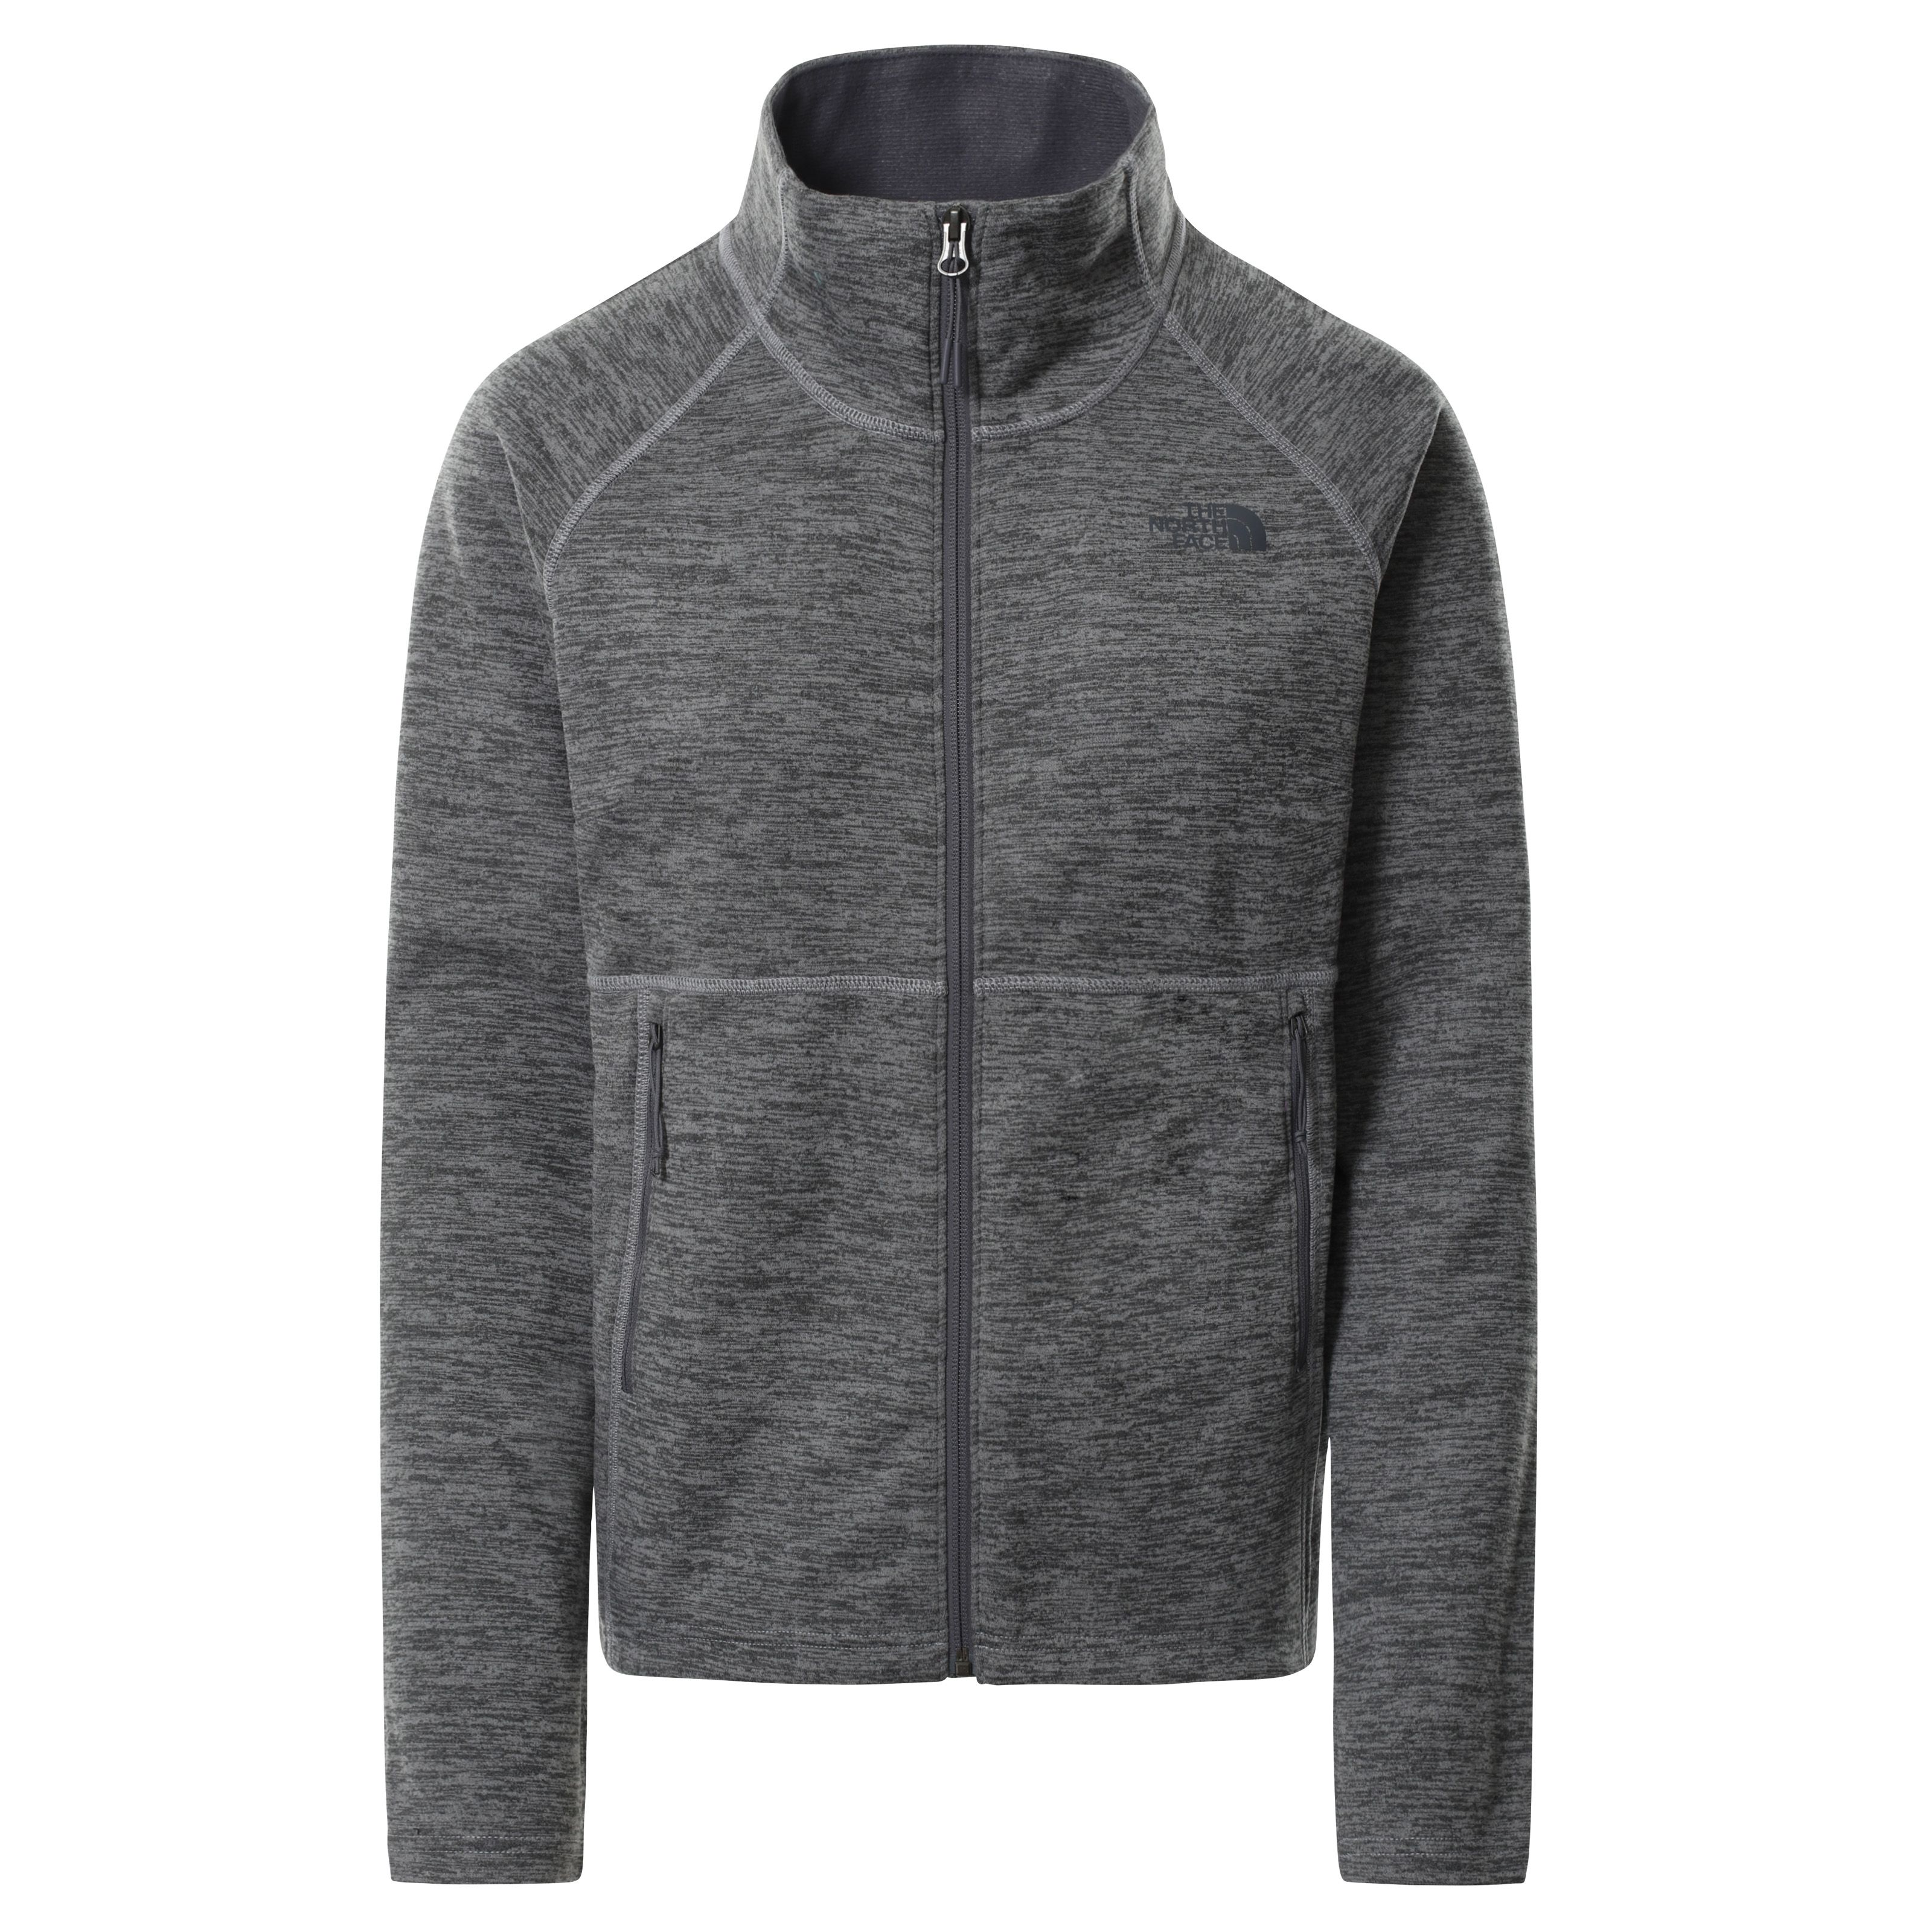 The North Face - W's Canyonlands Full Zip